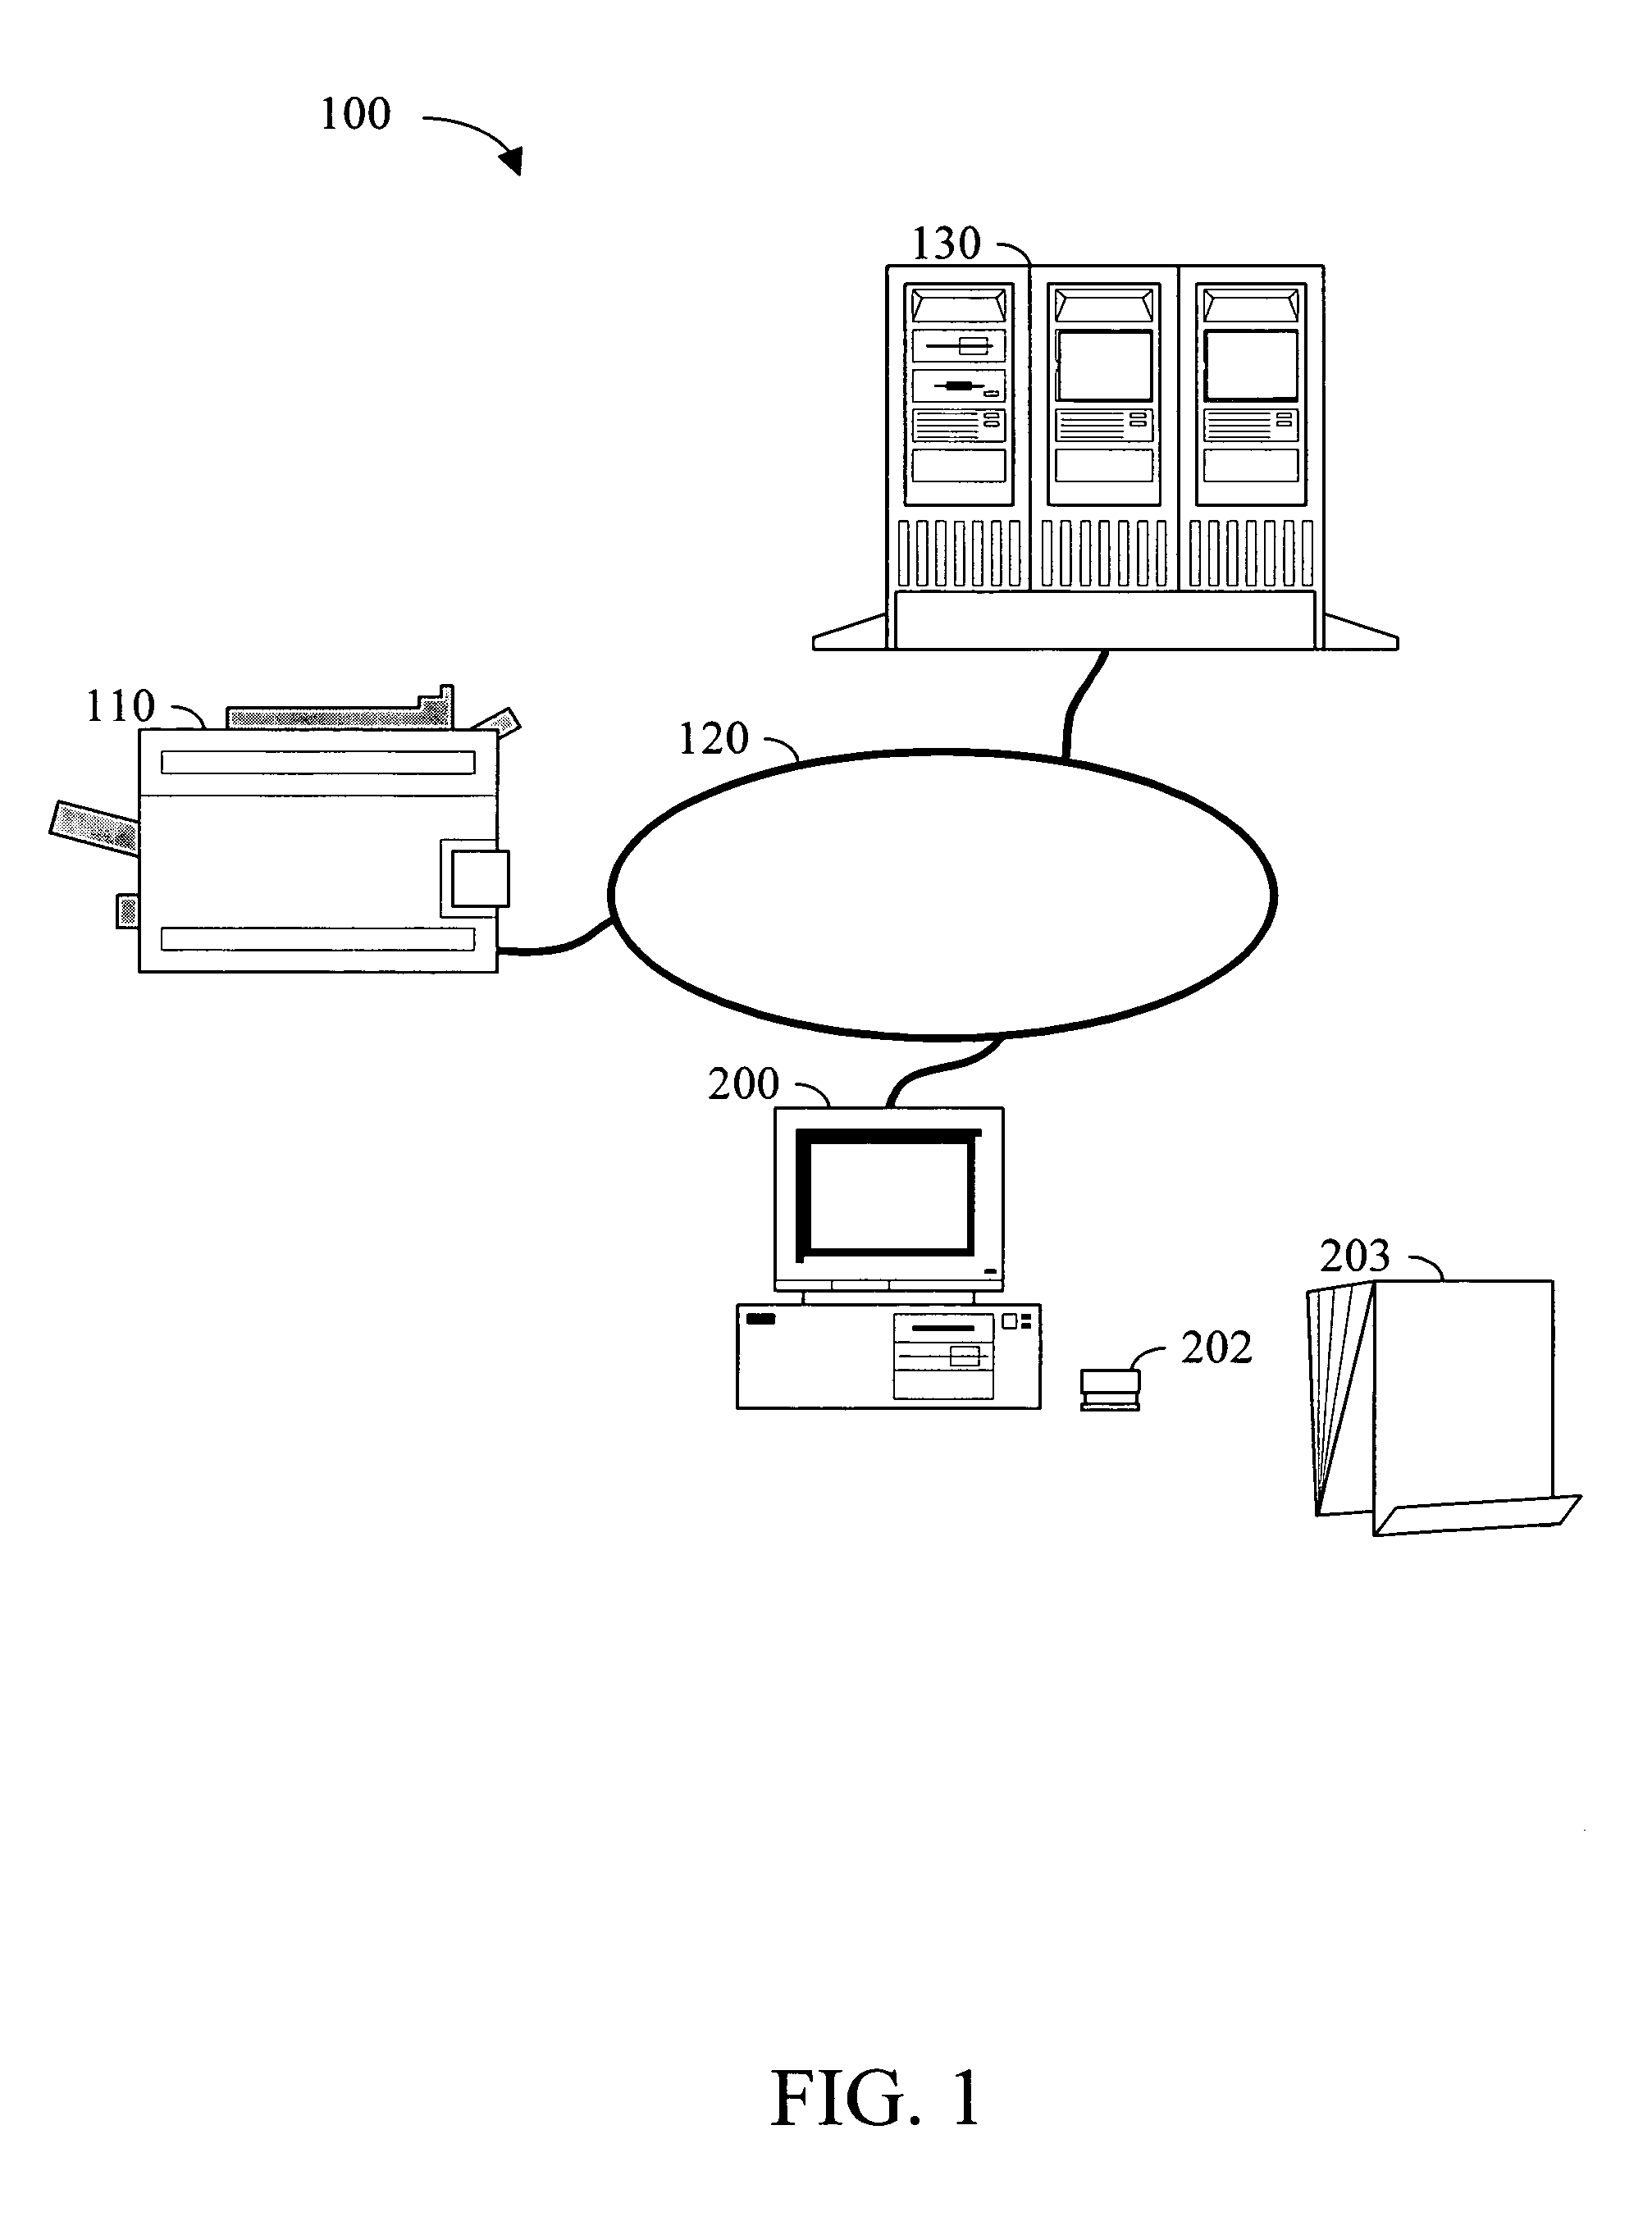 Apparatus and method for dynamically creating fax cover sheets containing dynamic and static content zones